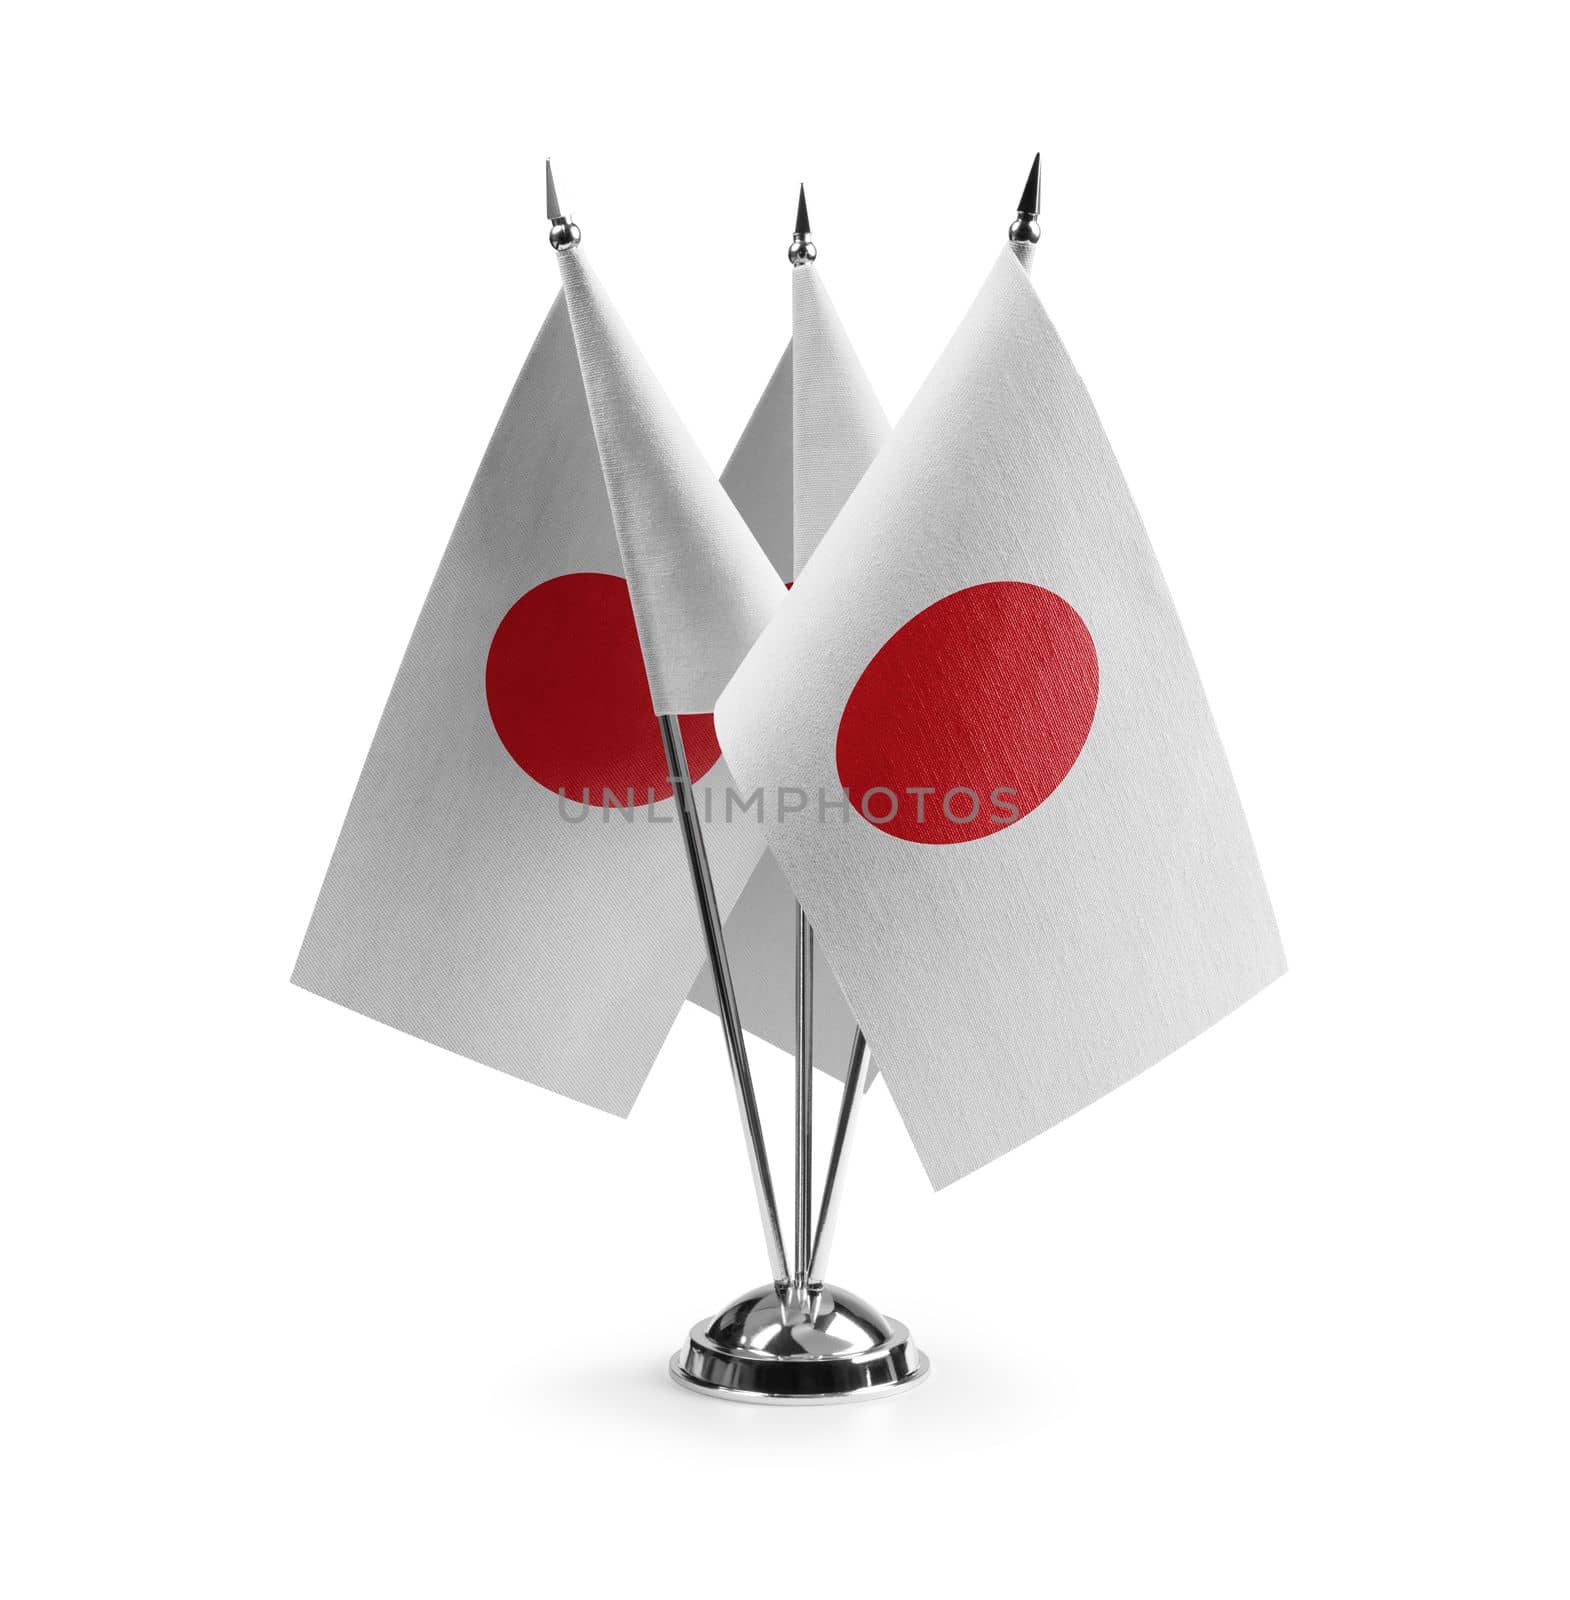 Small national flags of the Japan on a white background.